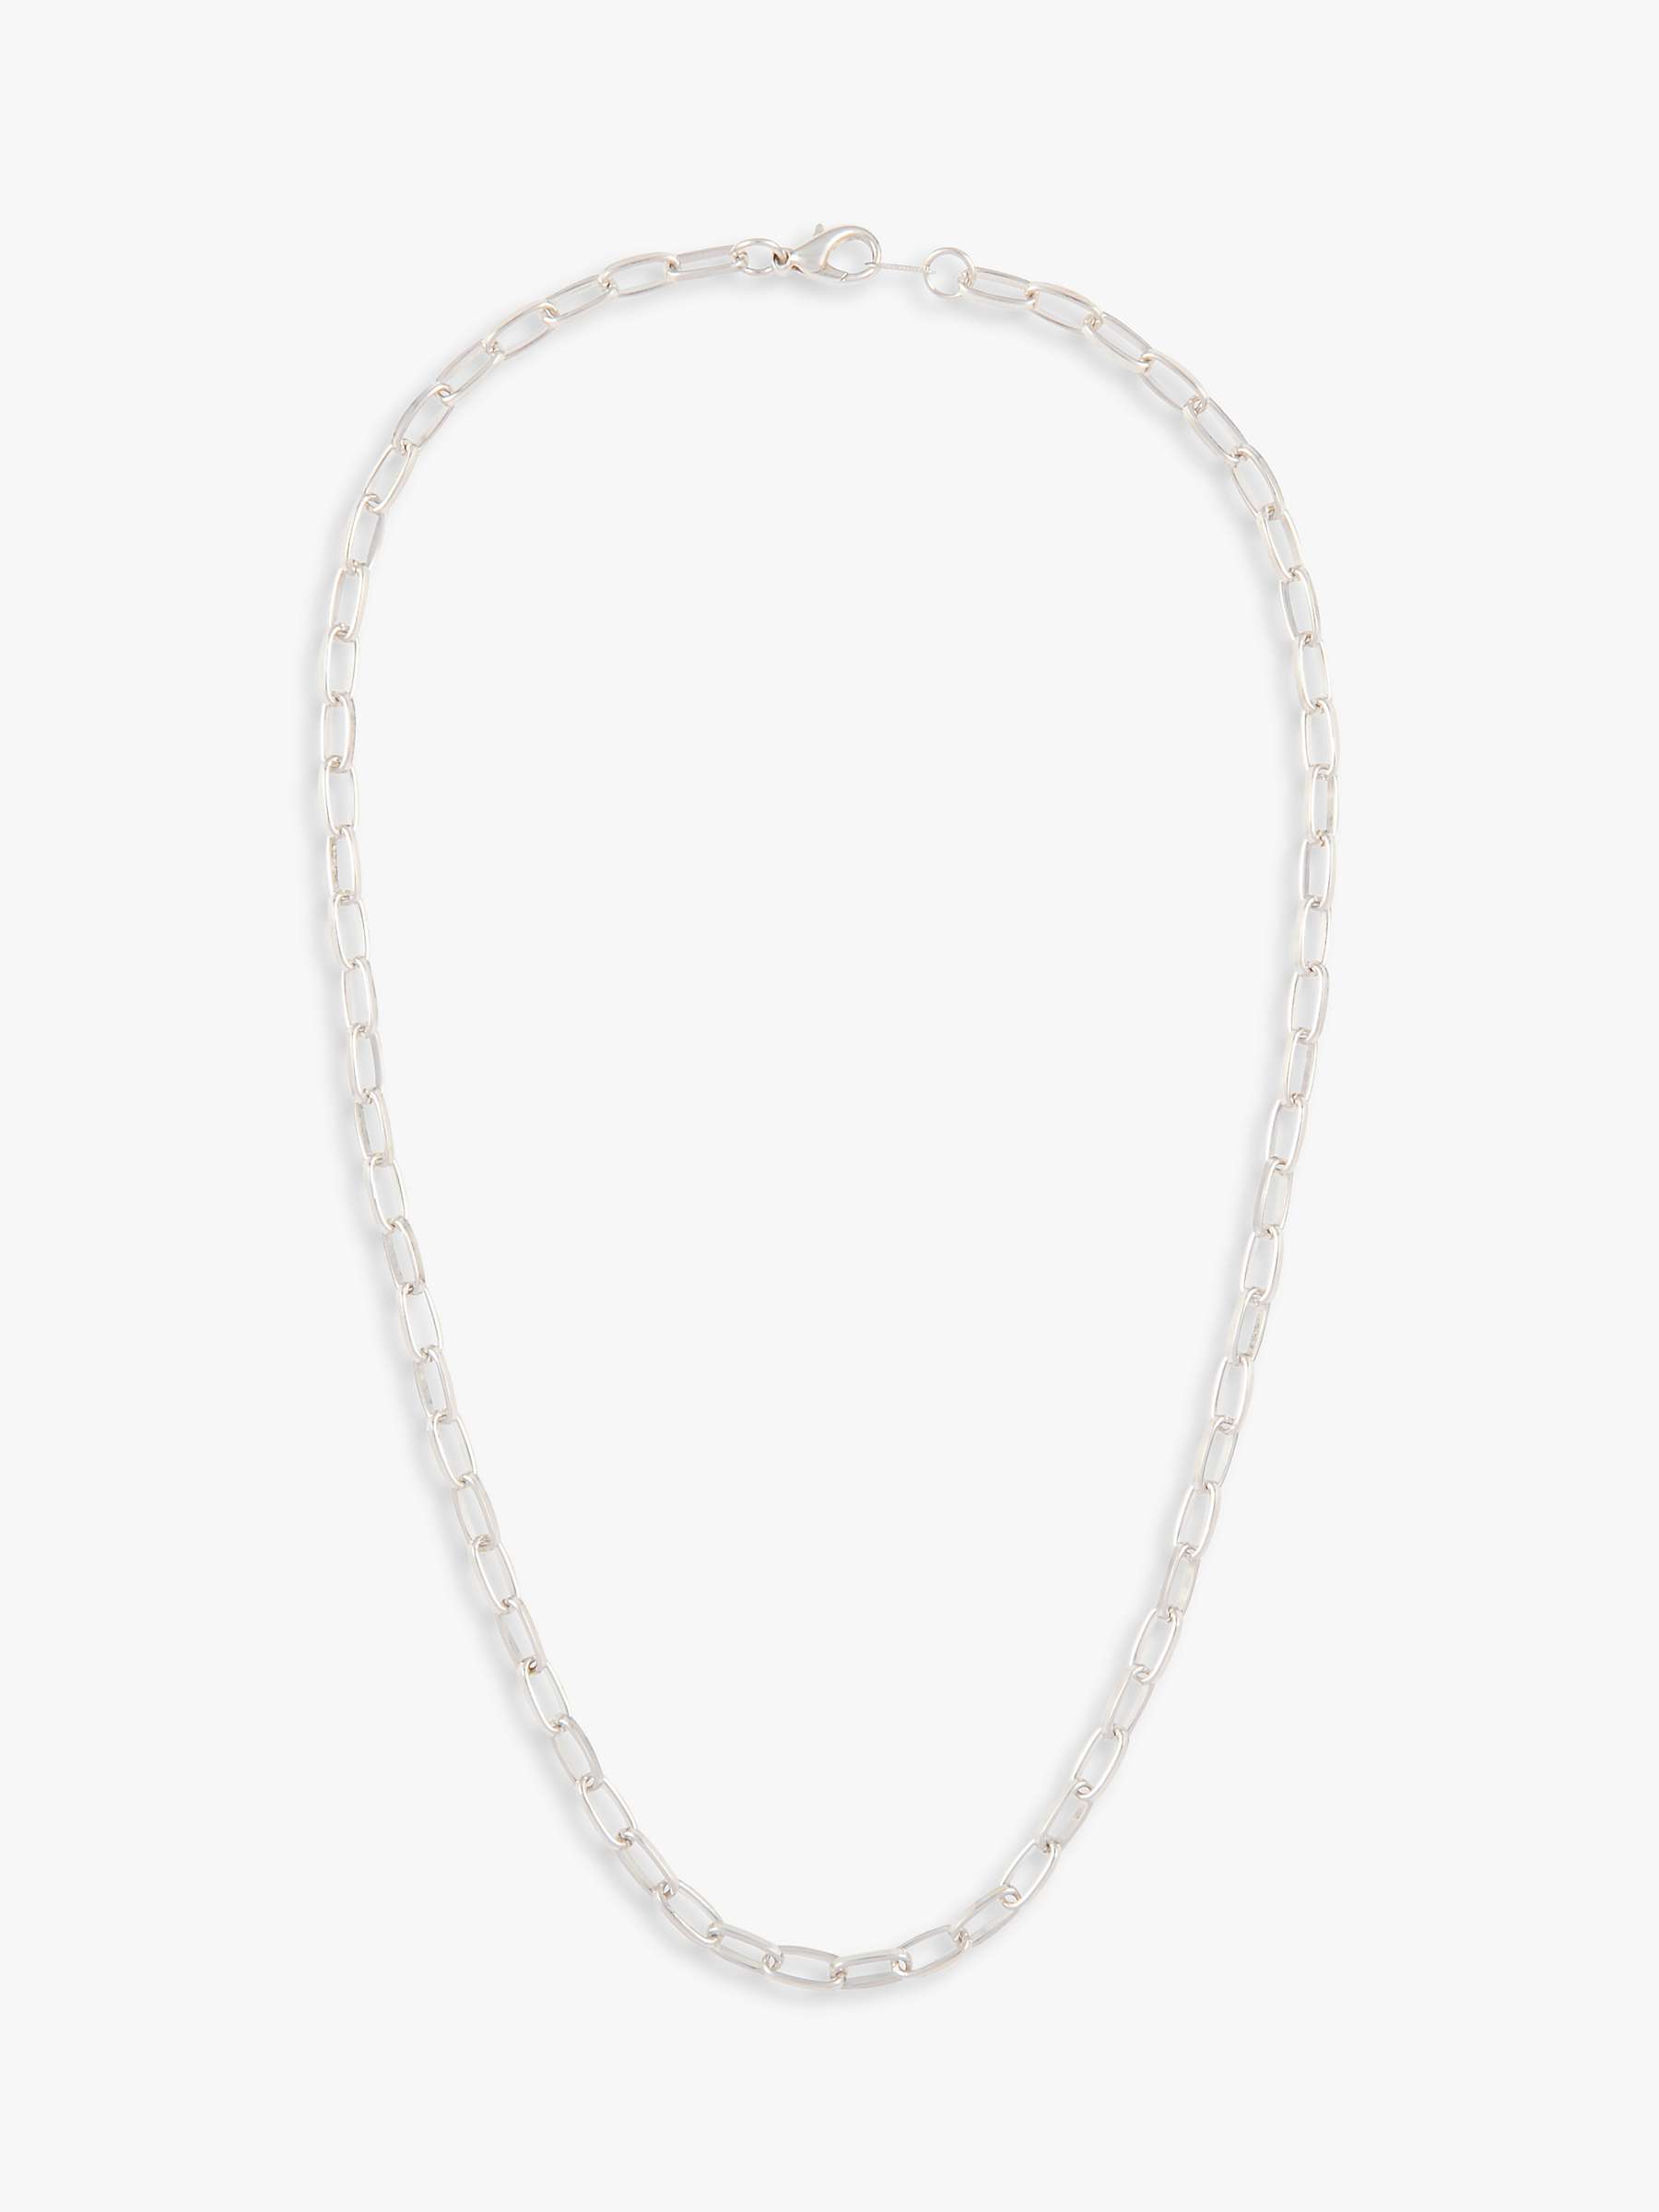 Buy Susan Caplan Vintage Rediscovered Collection Rectangular Link Chain Necklace, Silver Online at johnlewis.com